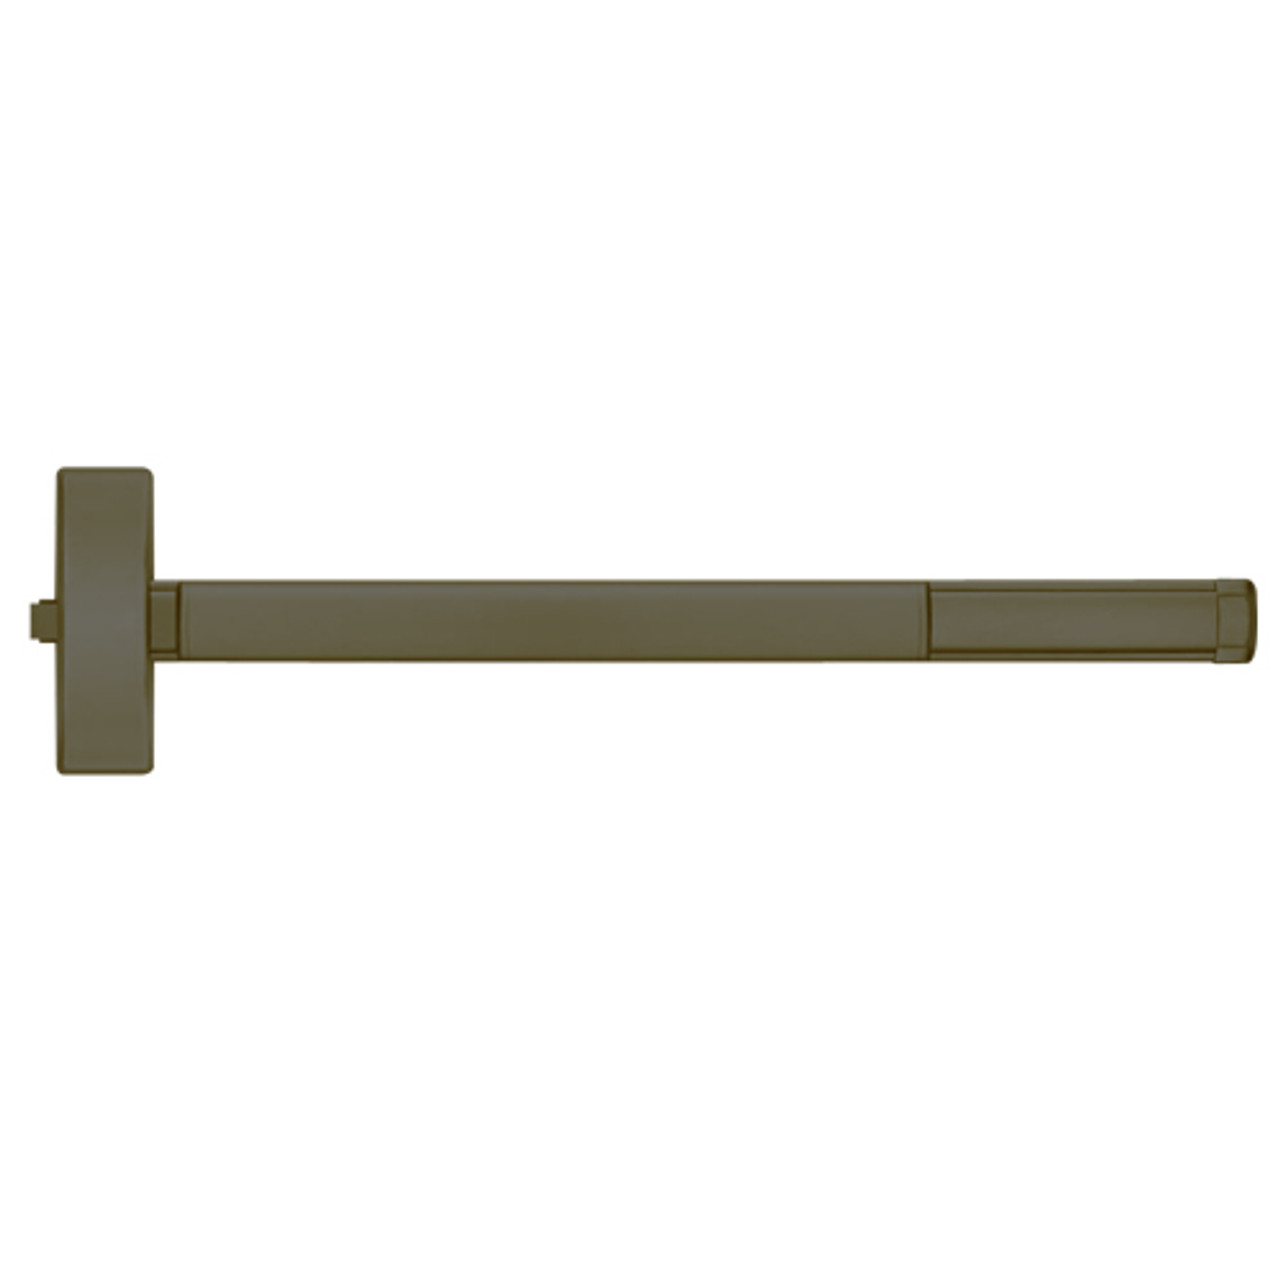 MLRFL2115-613-36 PHI 2100 Series Fire Rated Apex Rim Exit Device with Motorized Latch Retraction Prepped for Thumb Piece Always Active in Oil Rubbed Bronze Finish